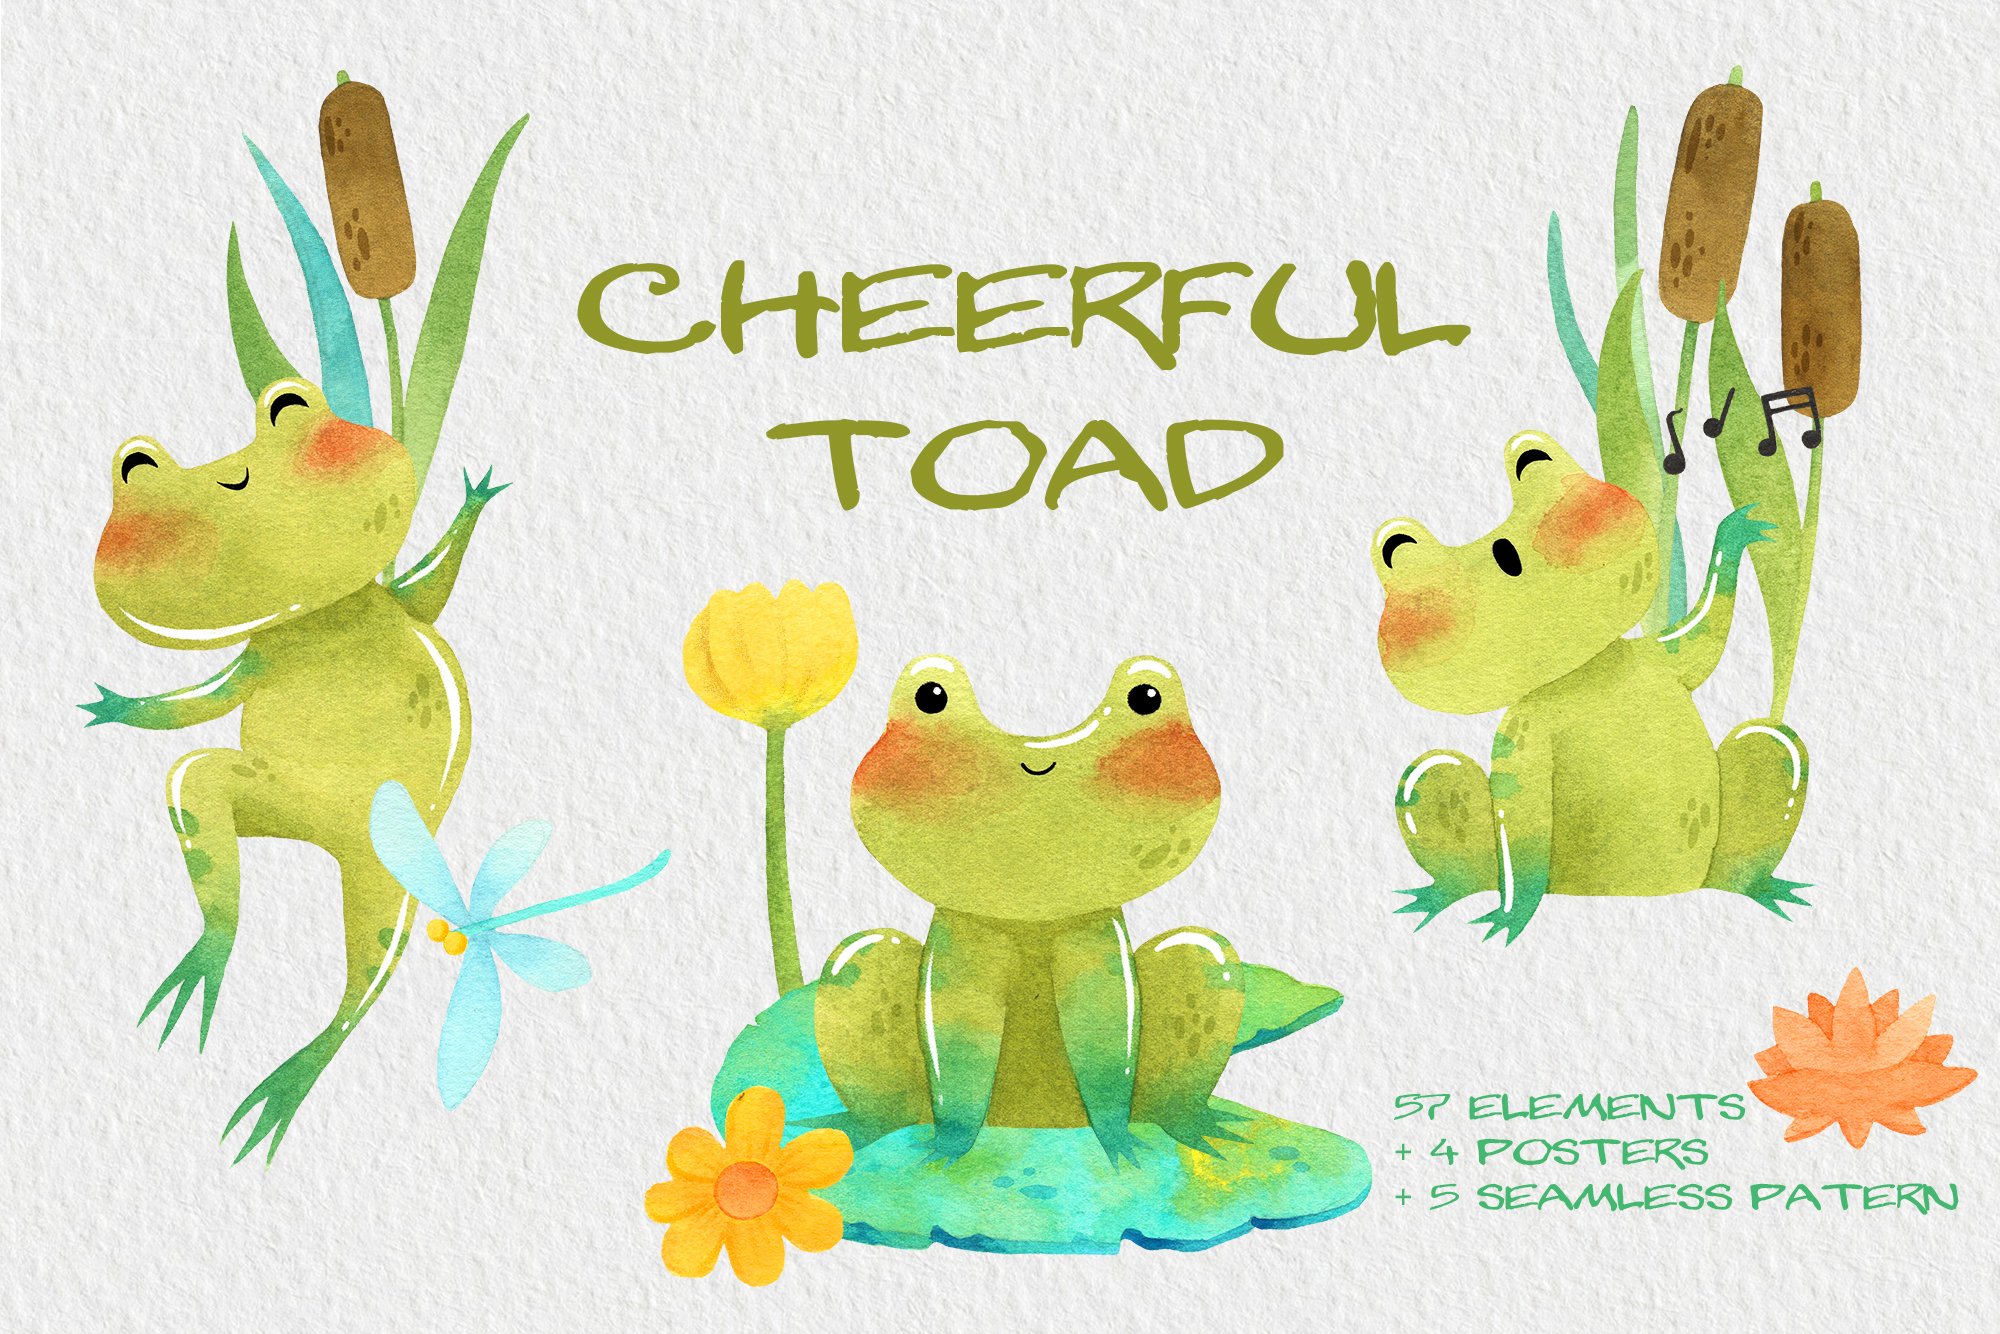 Cheerful toad for you.